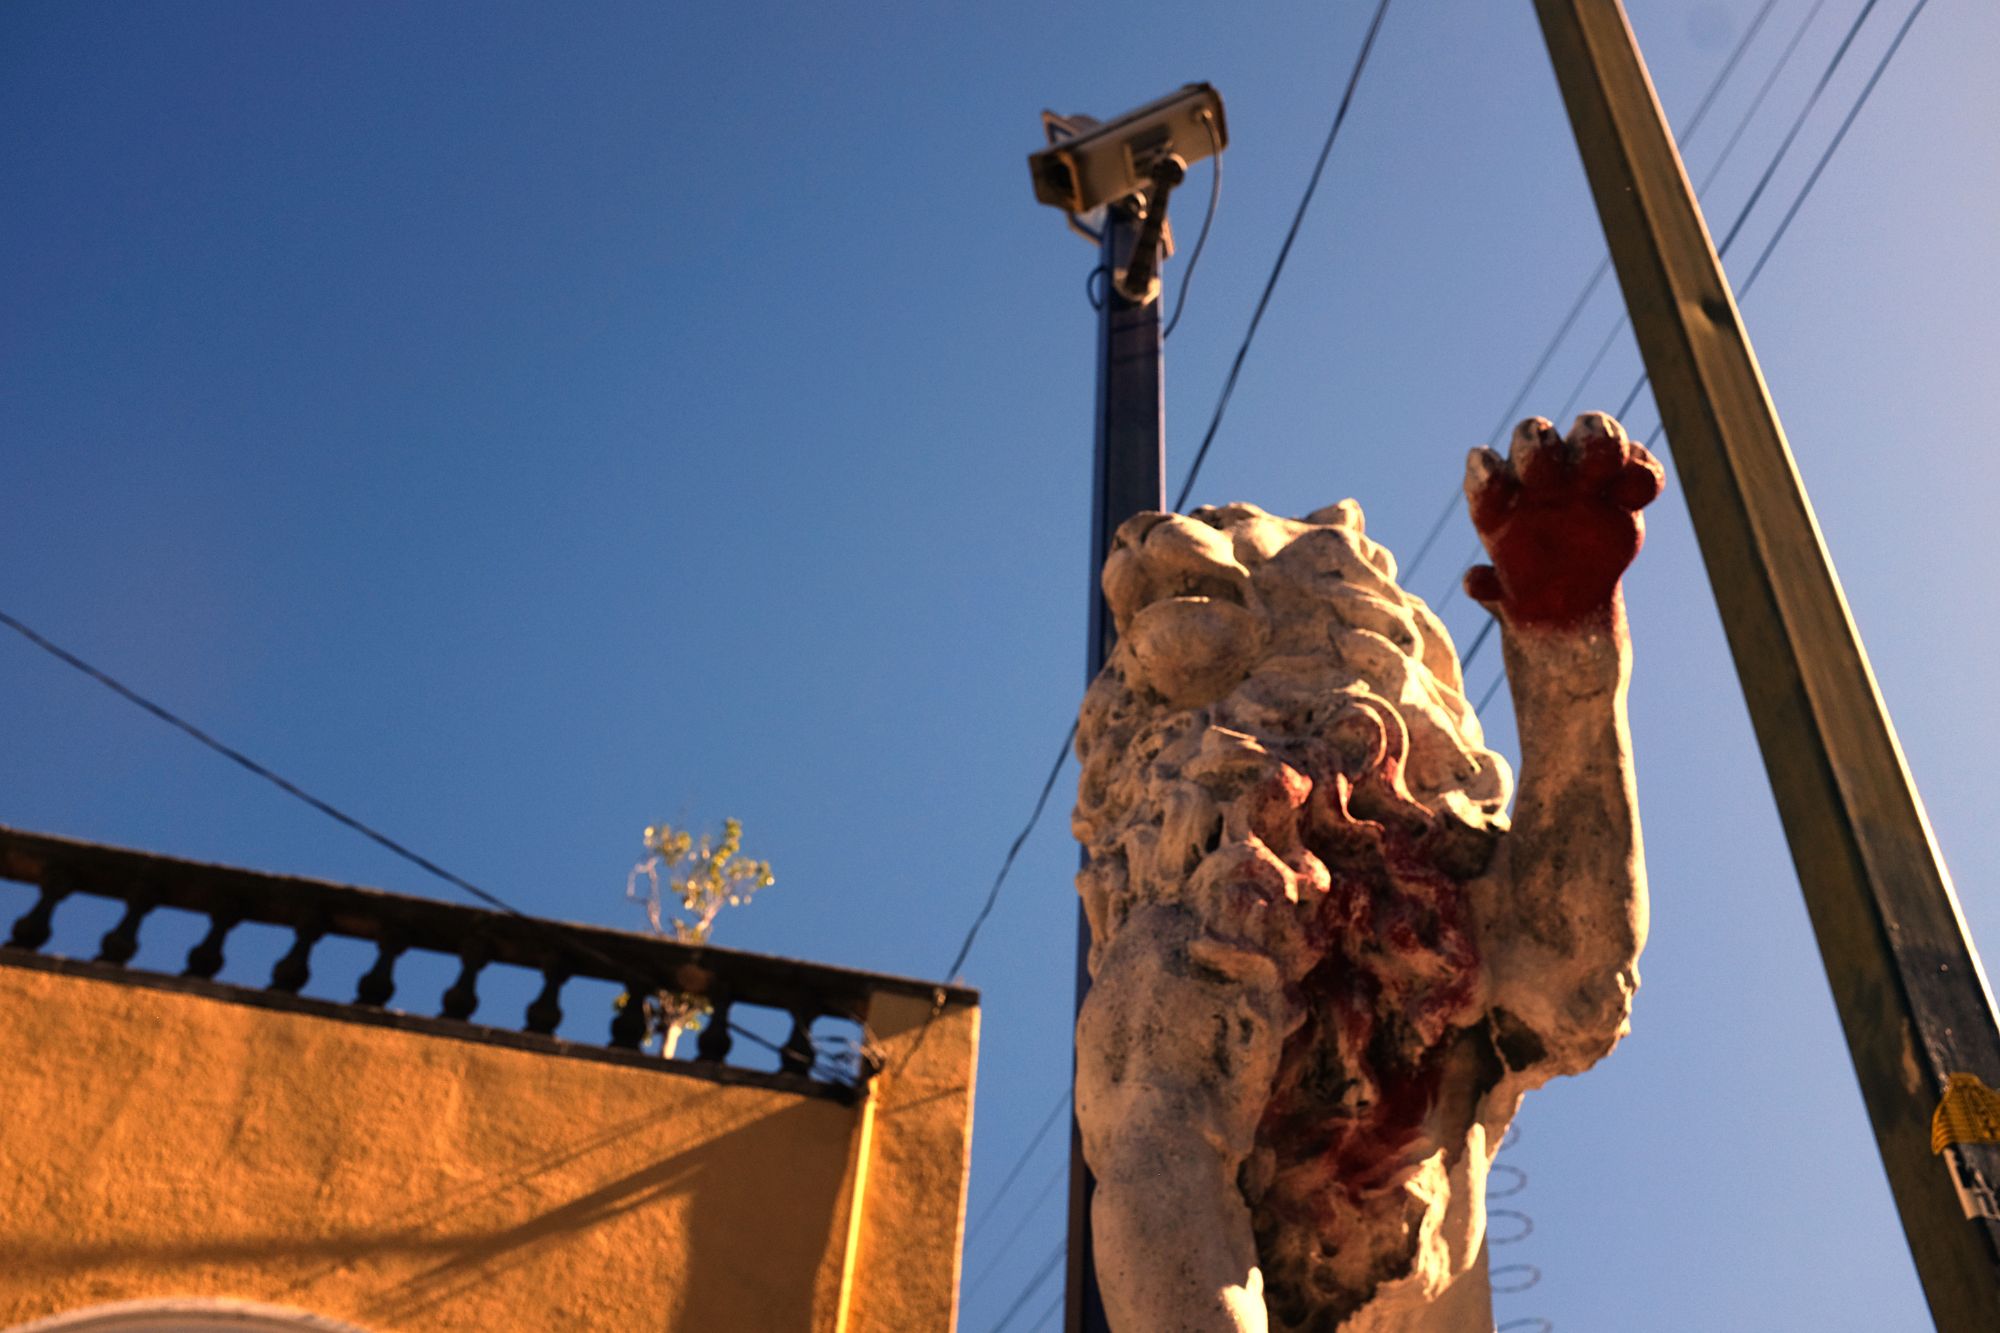 Lion statue in Guadalajara with power lines and a building behind